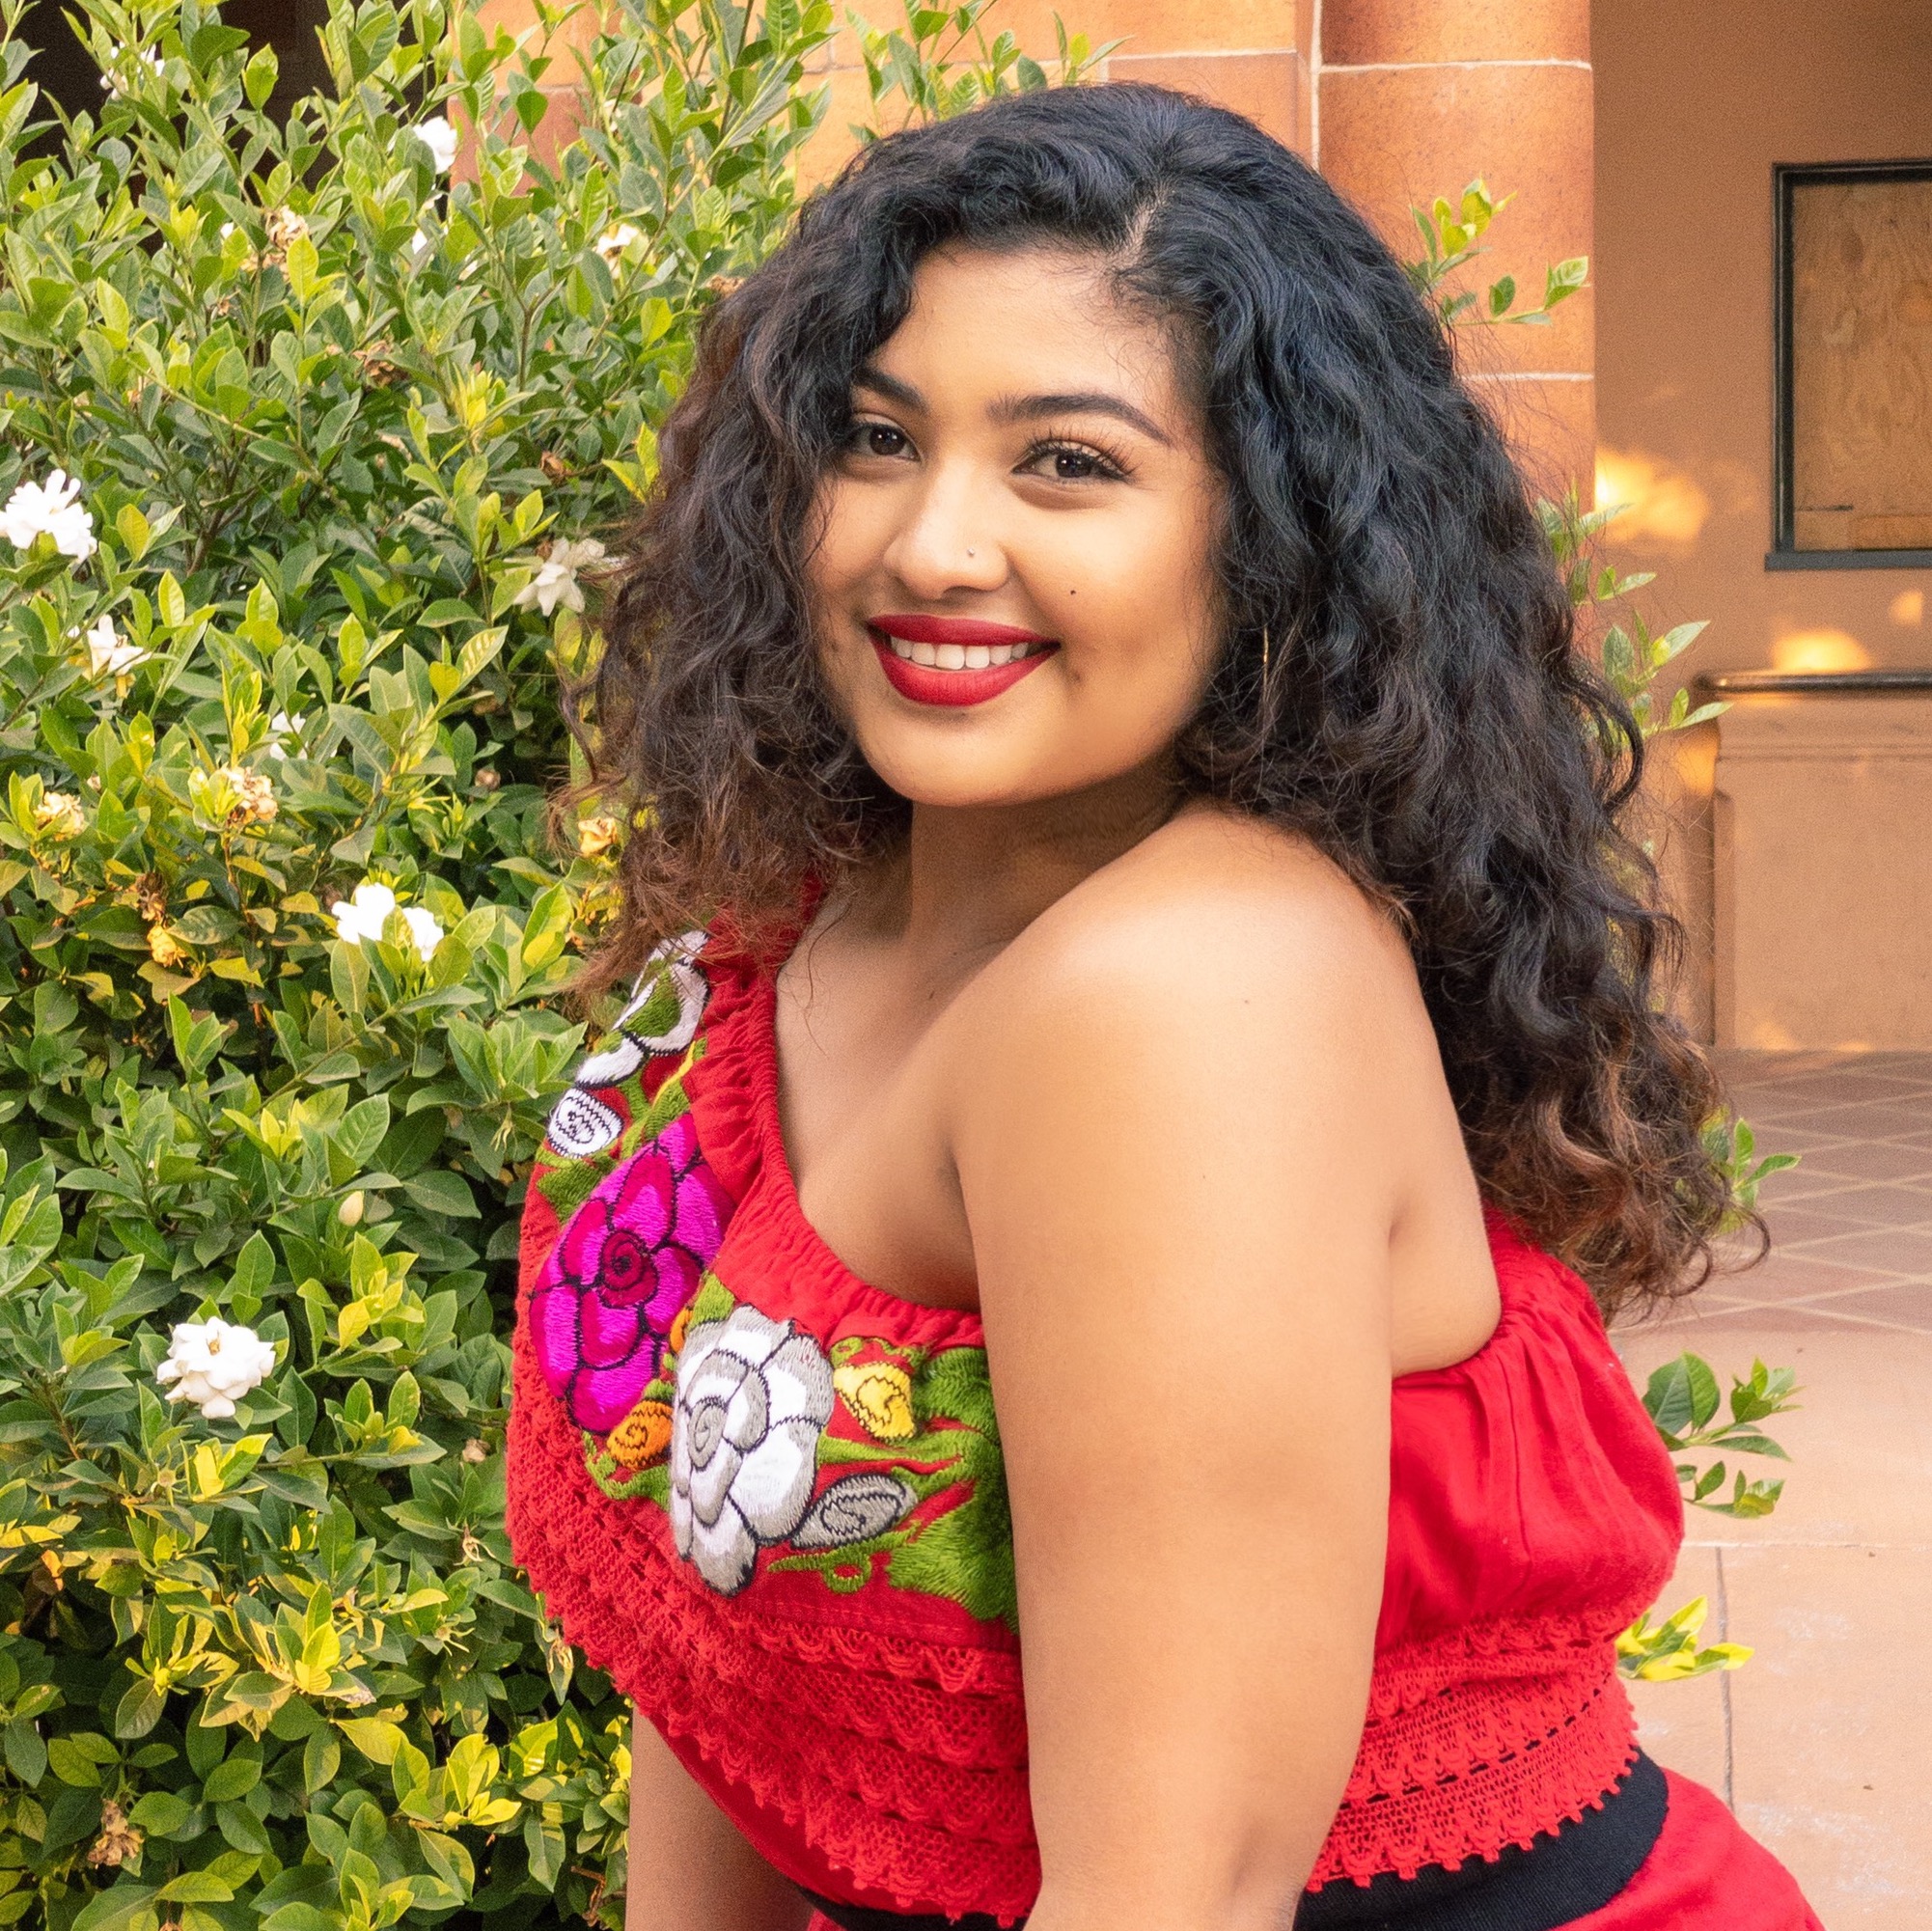 ennifer Mendoza is a third-year double-majoring in Political Science (Legal Studies) and Sociology. She is being highlighted for Hispanic Heritage Month.